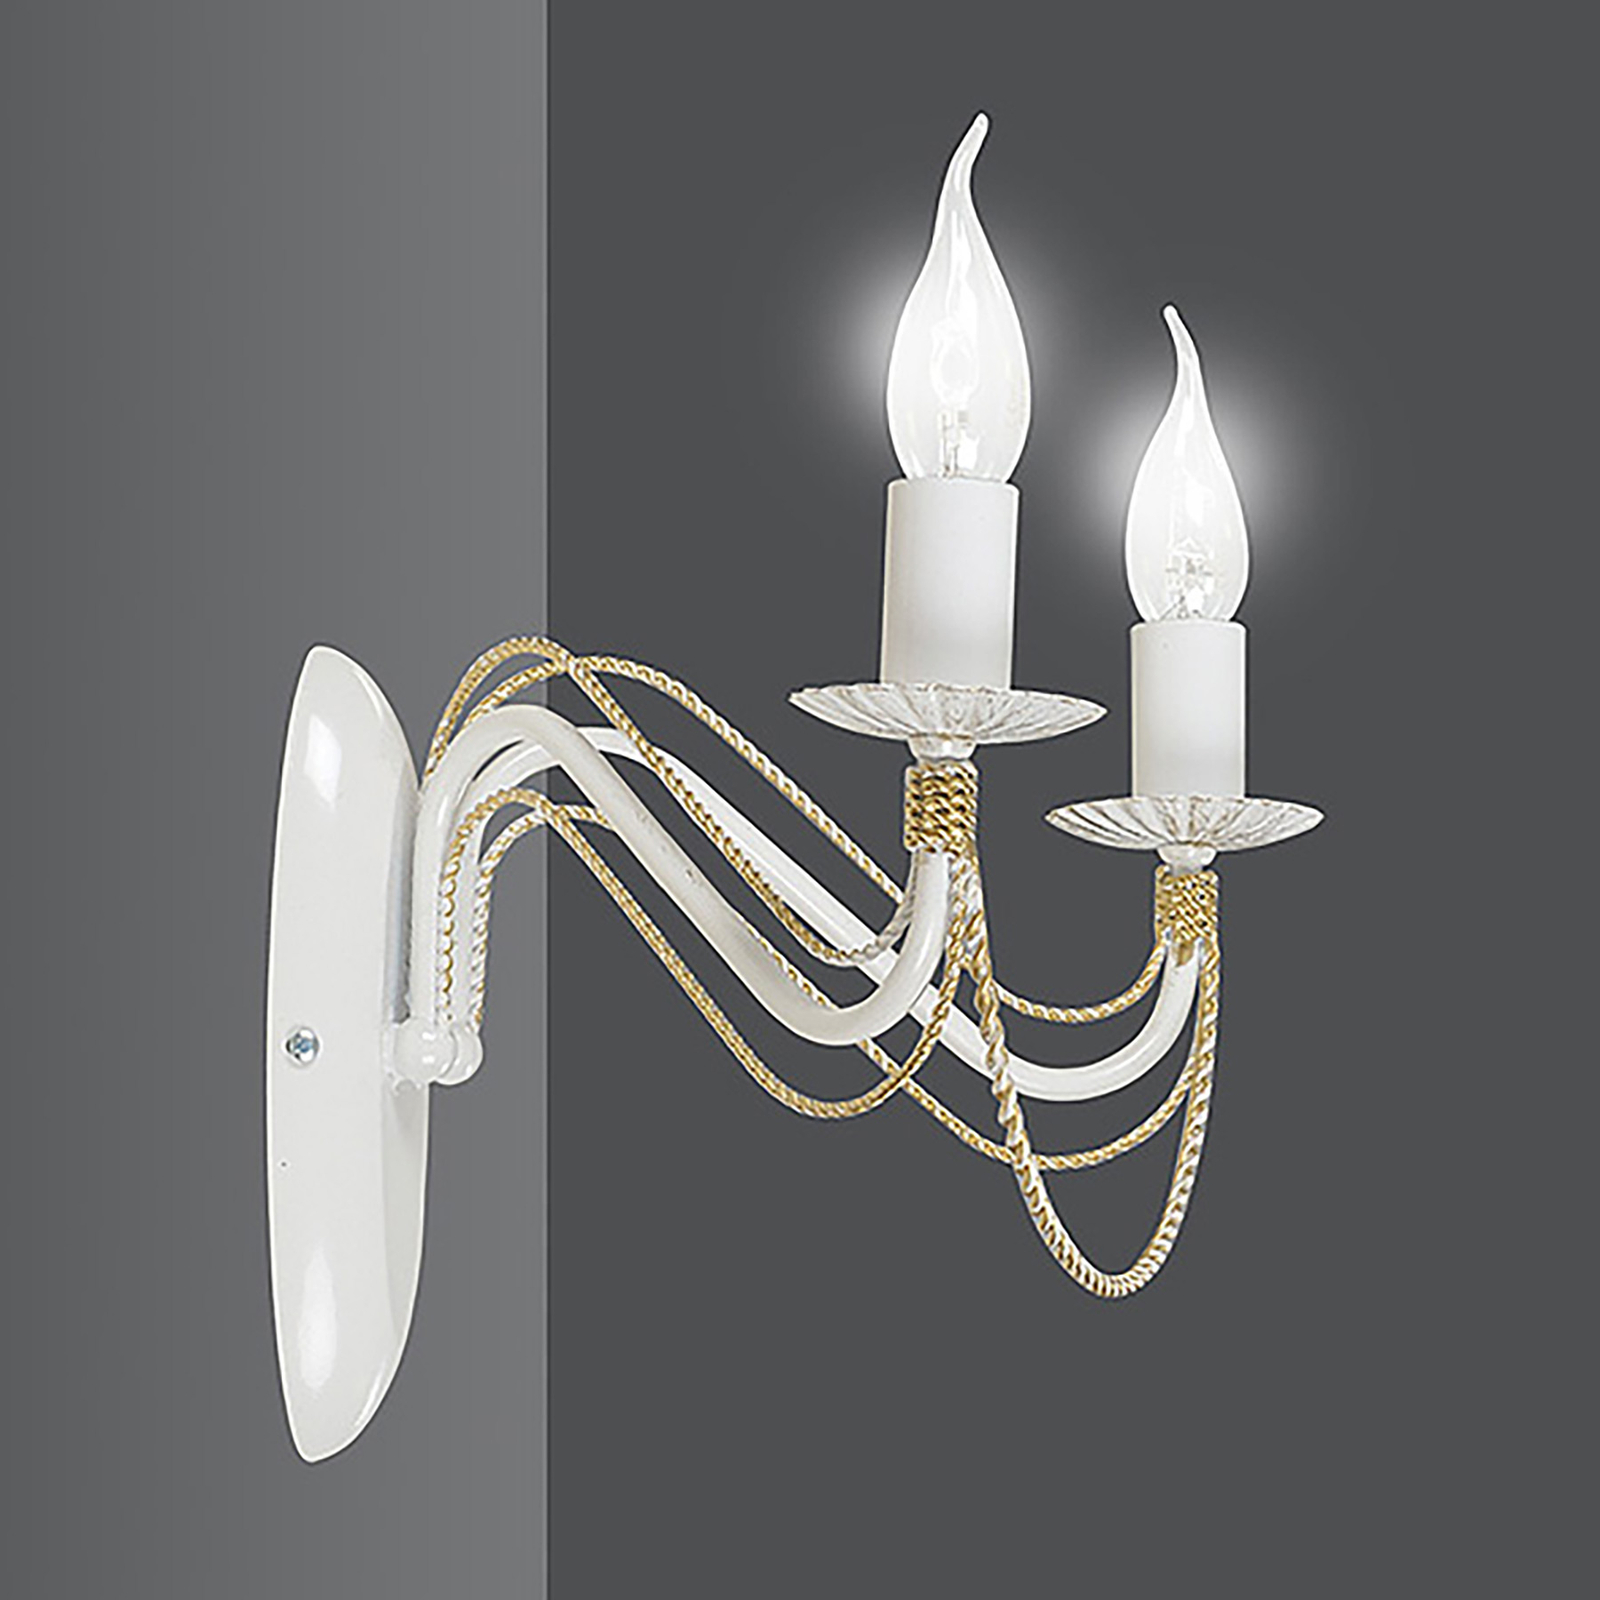 Tori wall light, candle holder look white two-bulb